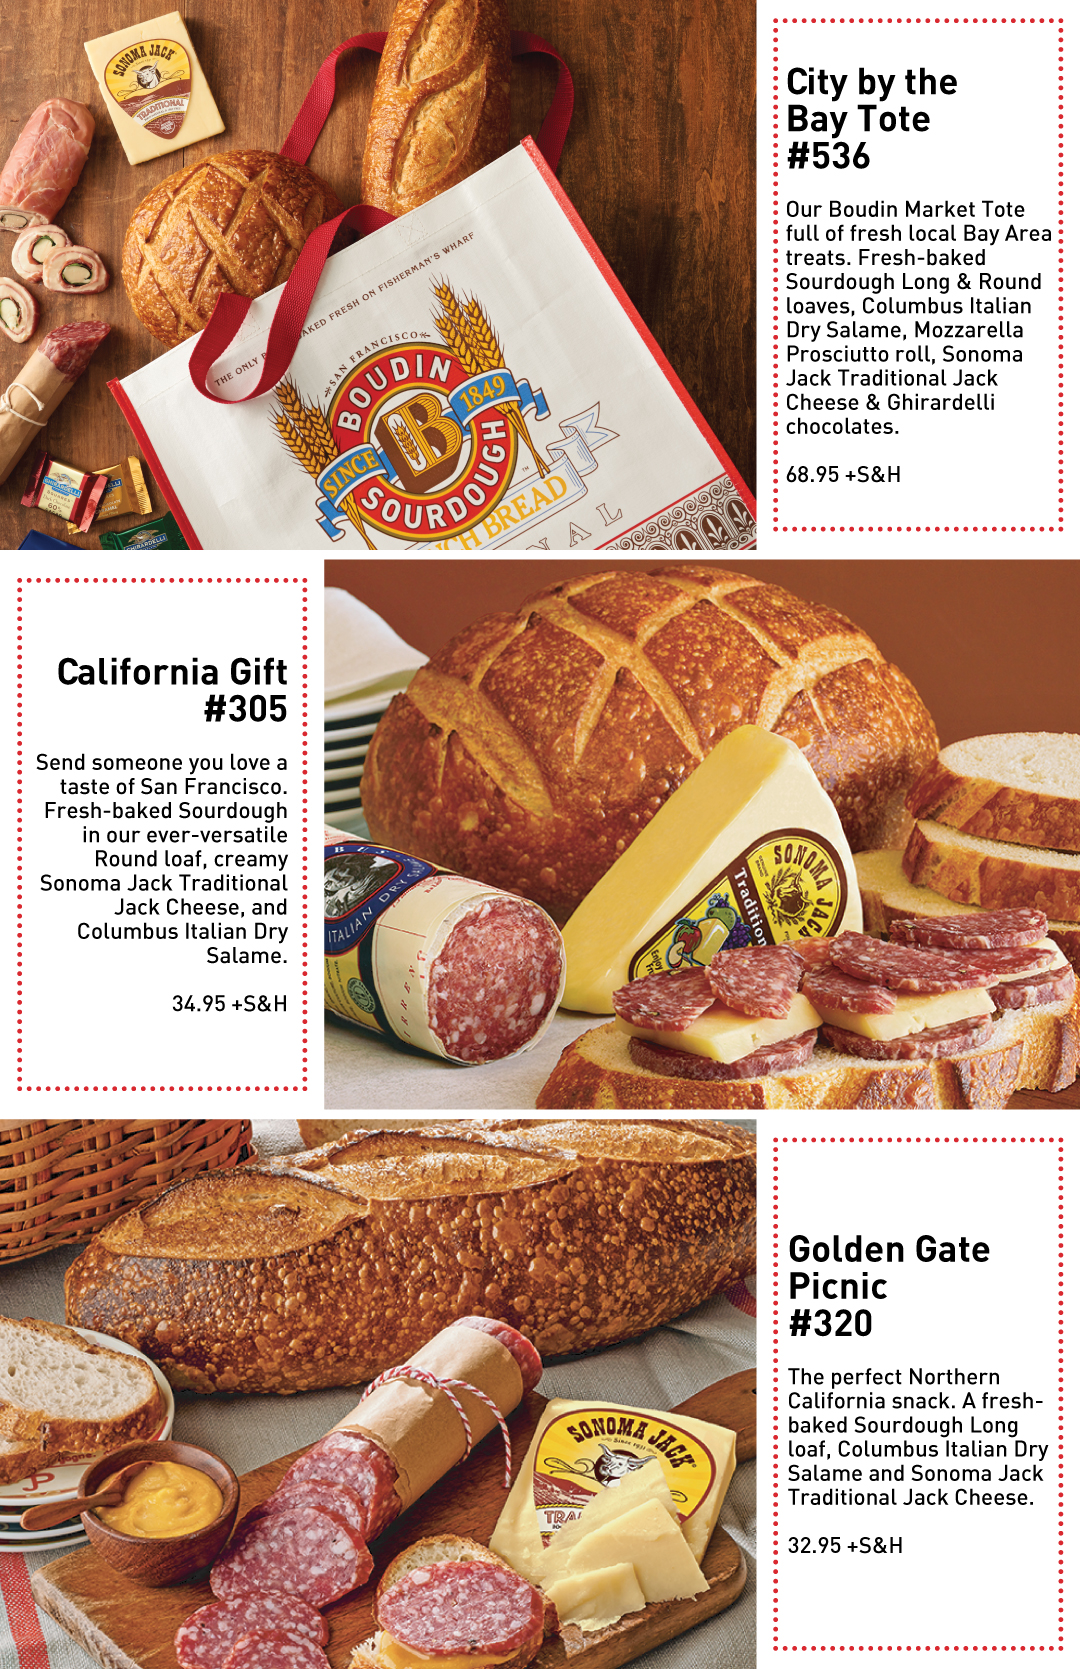 City by the Bay Tote #536 with Boudin reusable tote with bread and accompaniments on wood surface and priced at 68.95 +S&H. California Gift #305 with bread, salame and cheese on table and priced at 34.95 +S&H. Golden Gate Picnic #320 with Sourdough Long, Salame and Cheese on cutting board and priced at 32.95 +S&H.